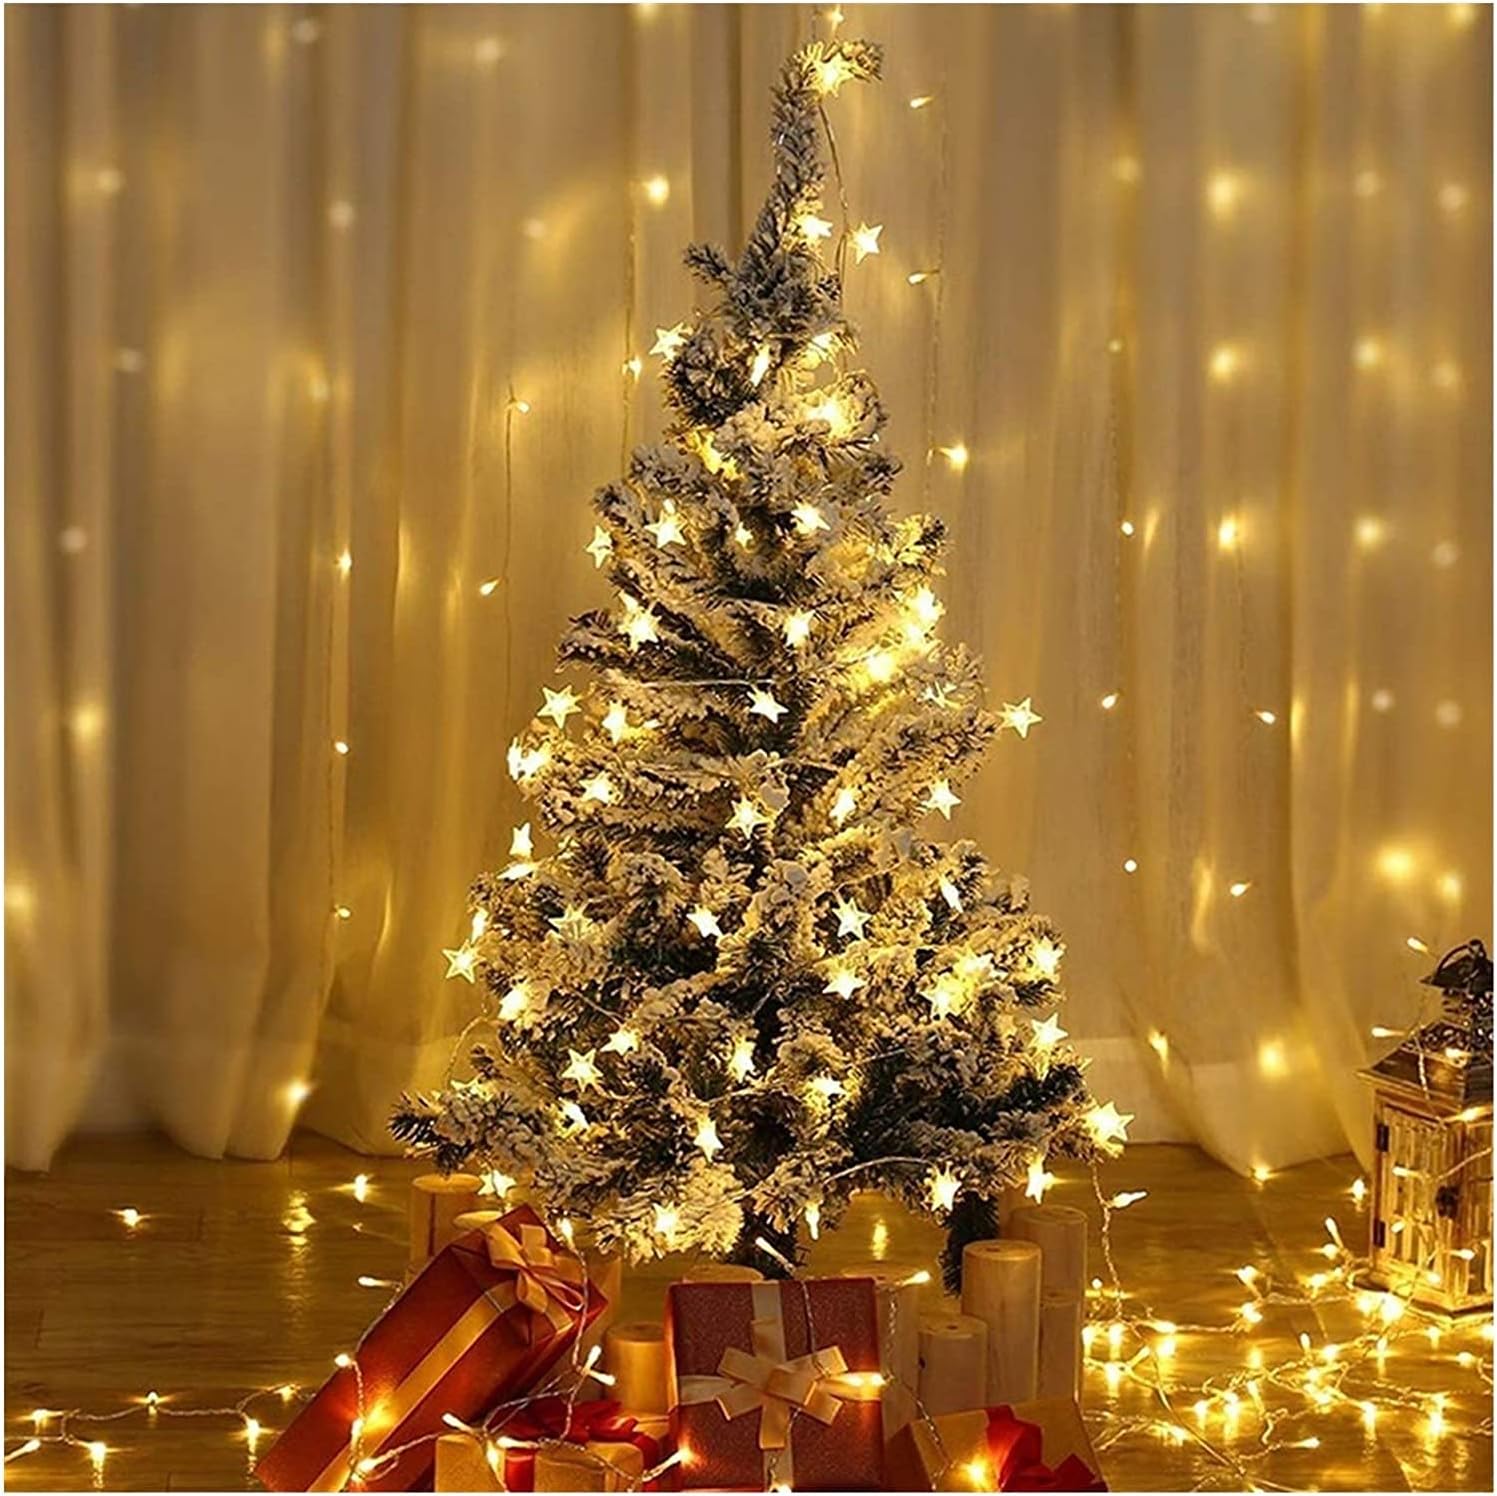 Yummuely Star Lights Star String Lights 10Ft 20 LED Star Fairy Lights Battery Operated Waterproof Indoor Outdoor Twinkle Christmas Light